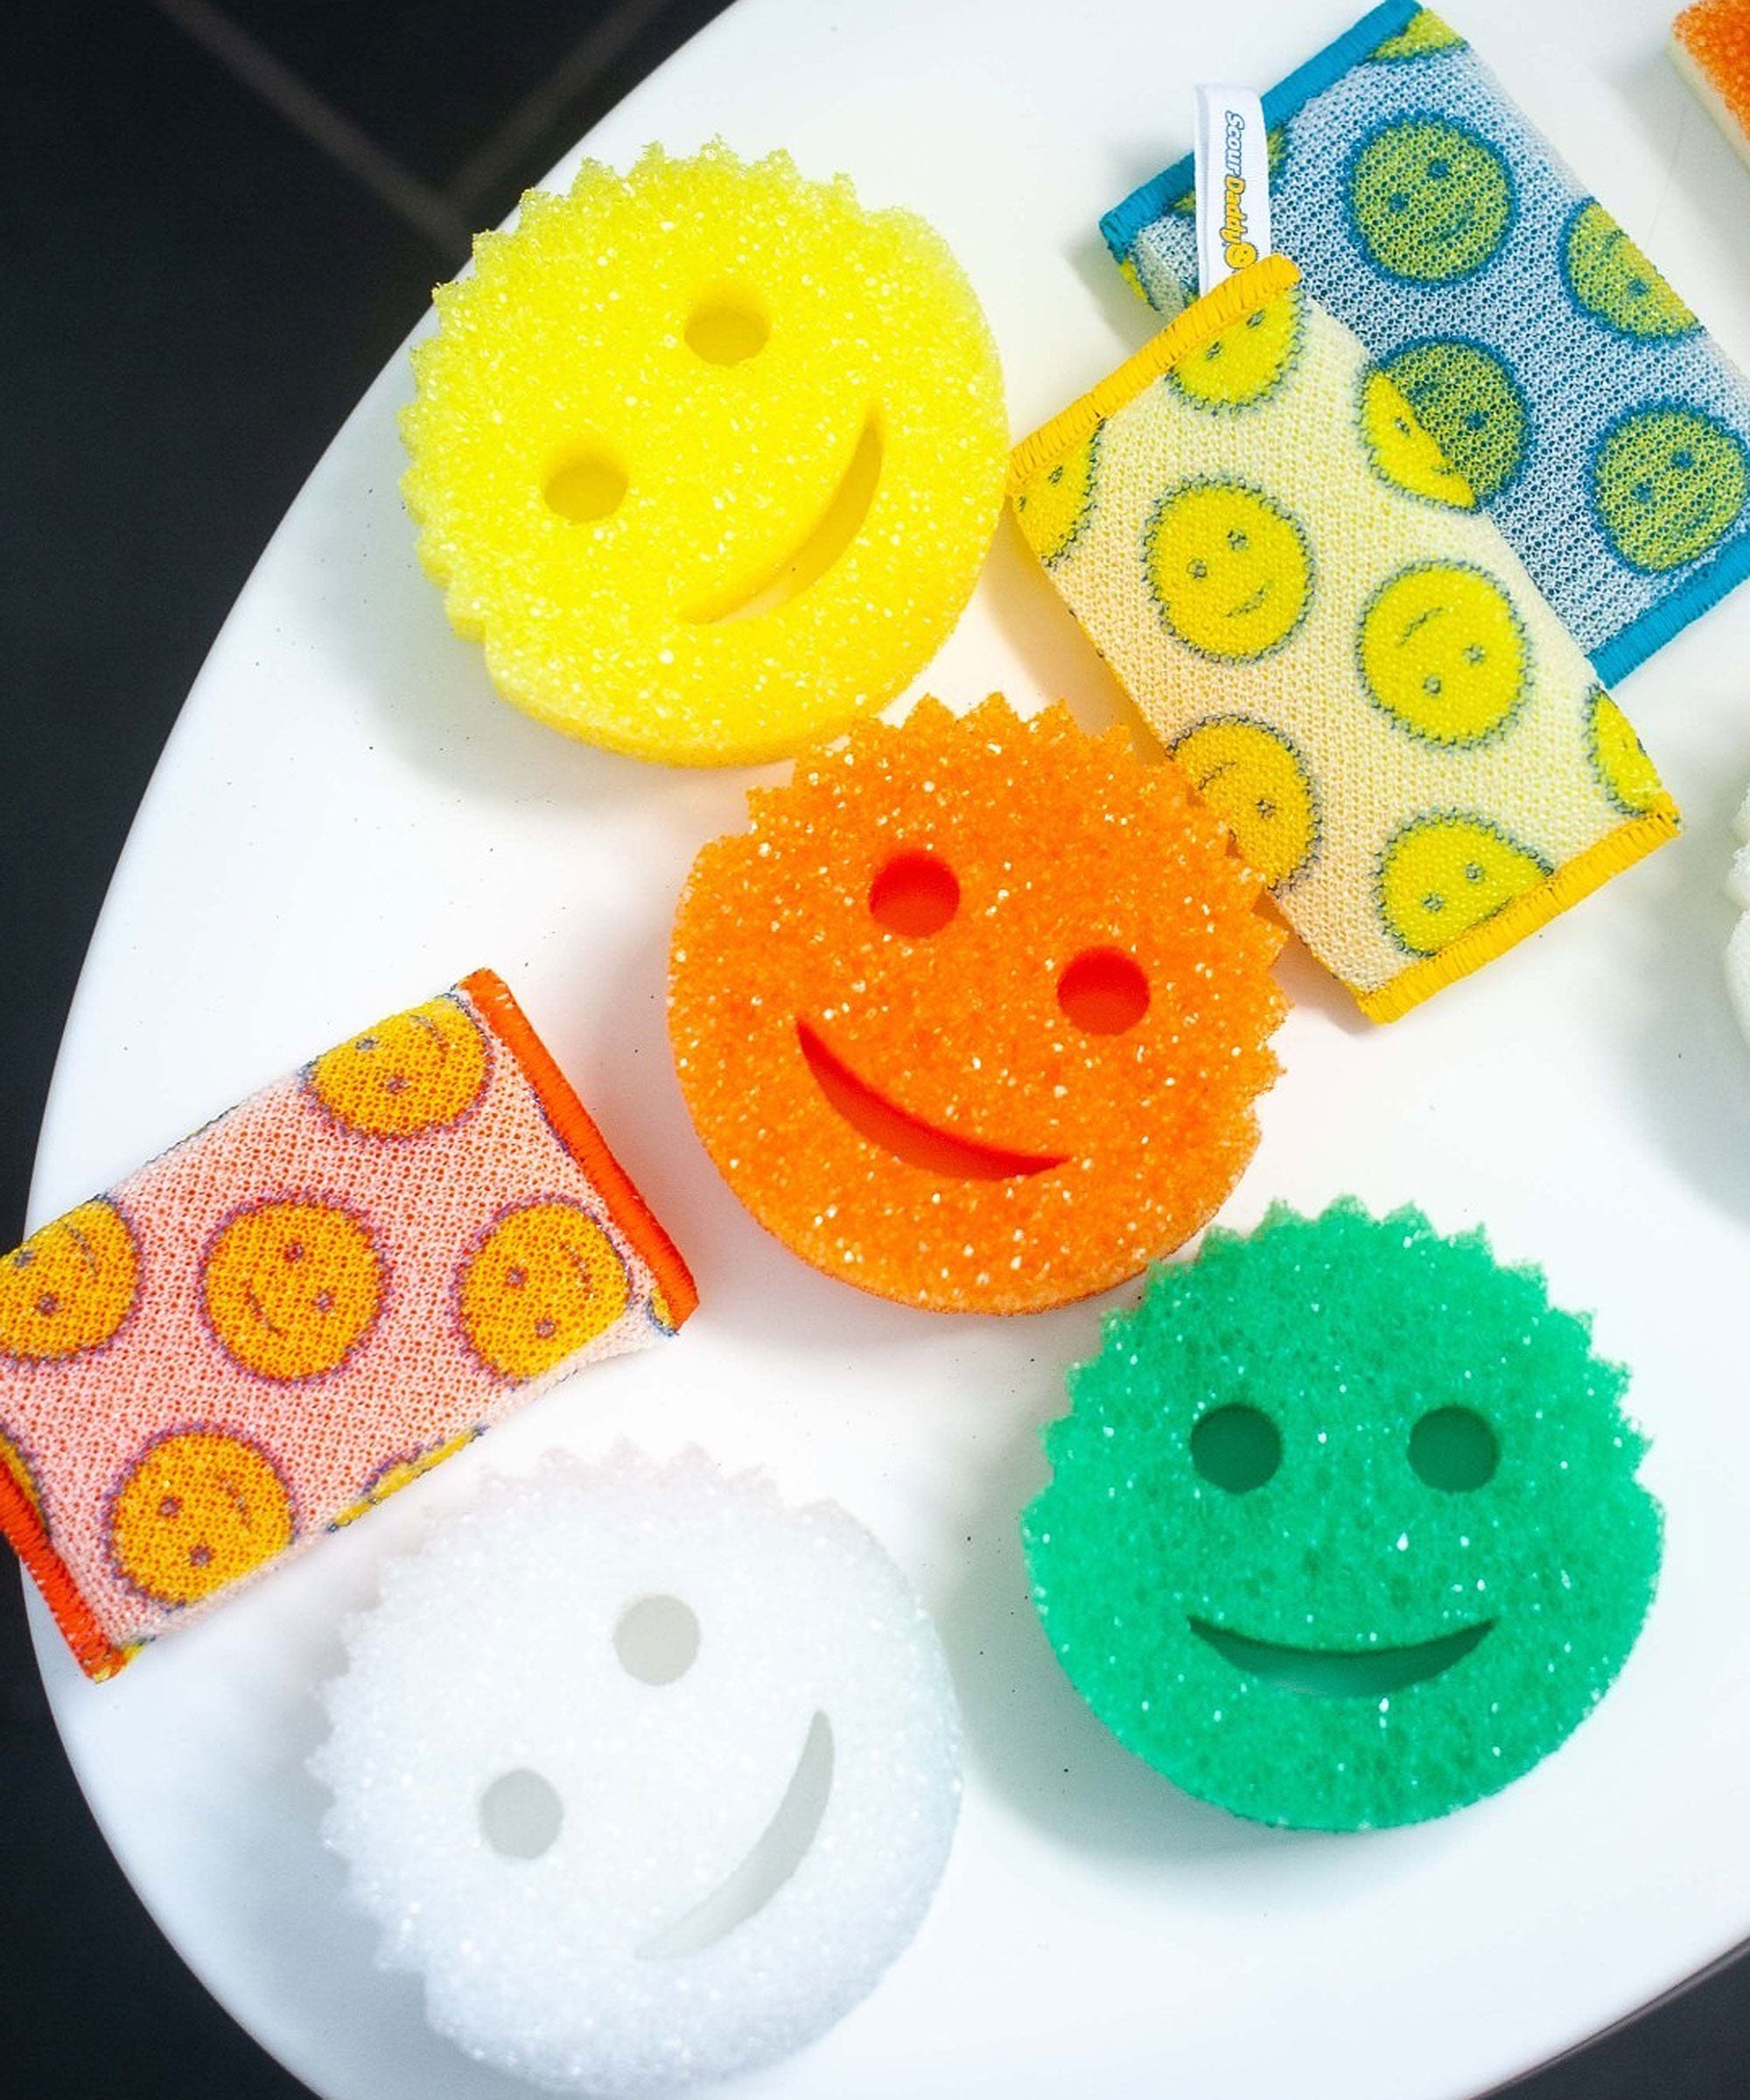 The Best Scrub Daddy Products, According To R29 Editors